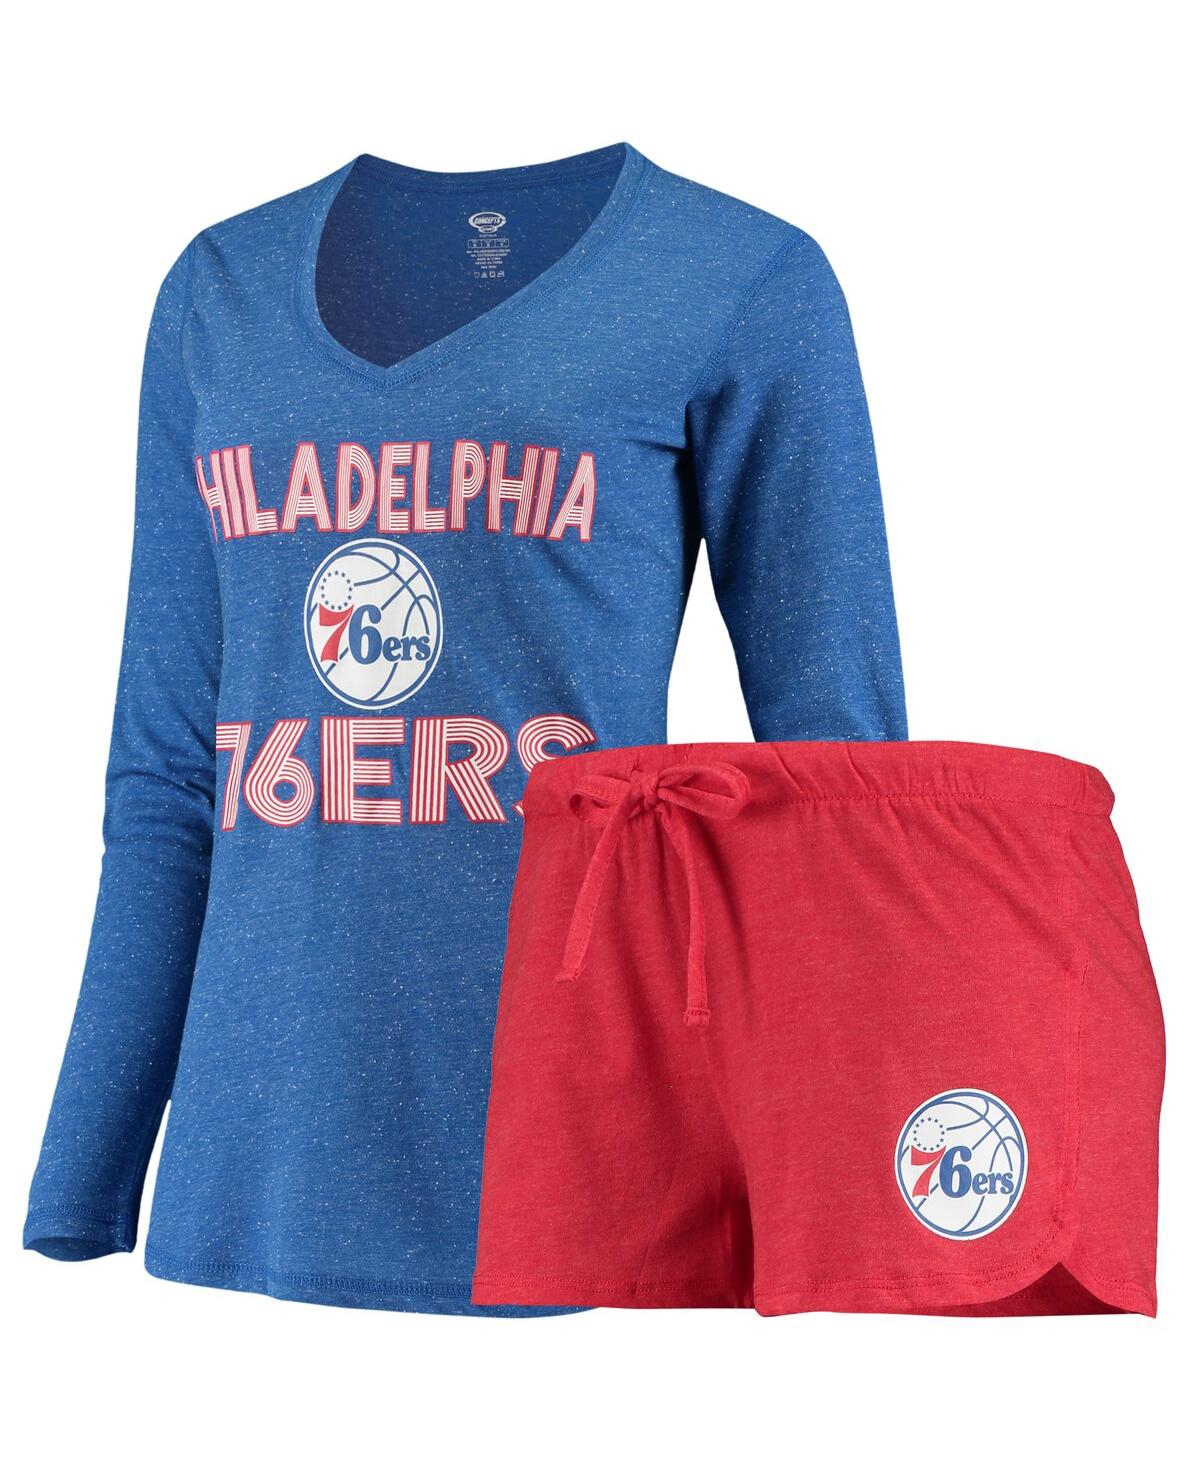 Women's Concepts Sport Red, Royal Philadelphia 76ers Long Sleeve T-shirt and Shorts Sleep Set - Red, Royal